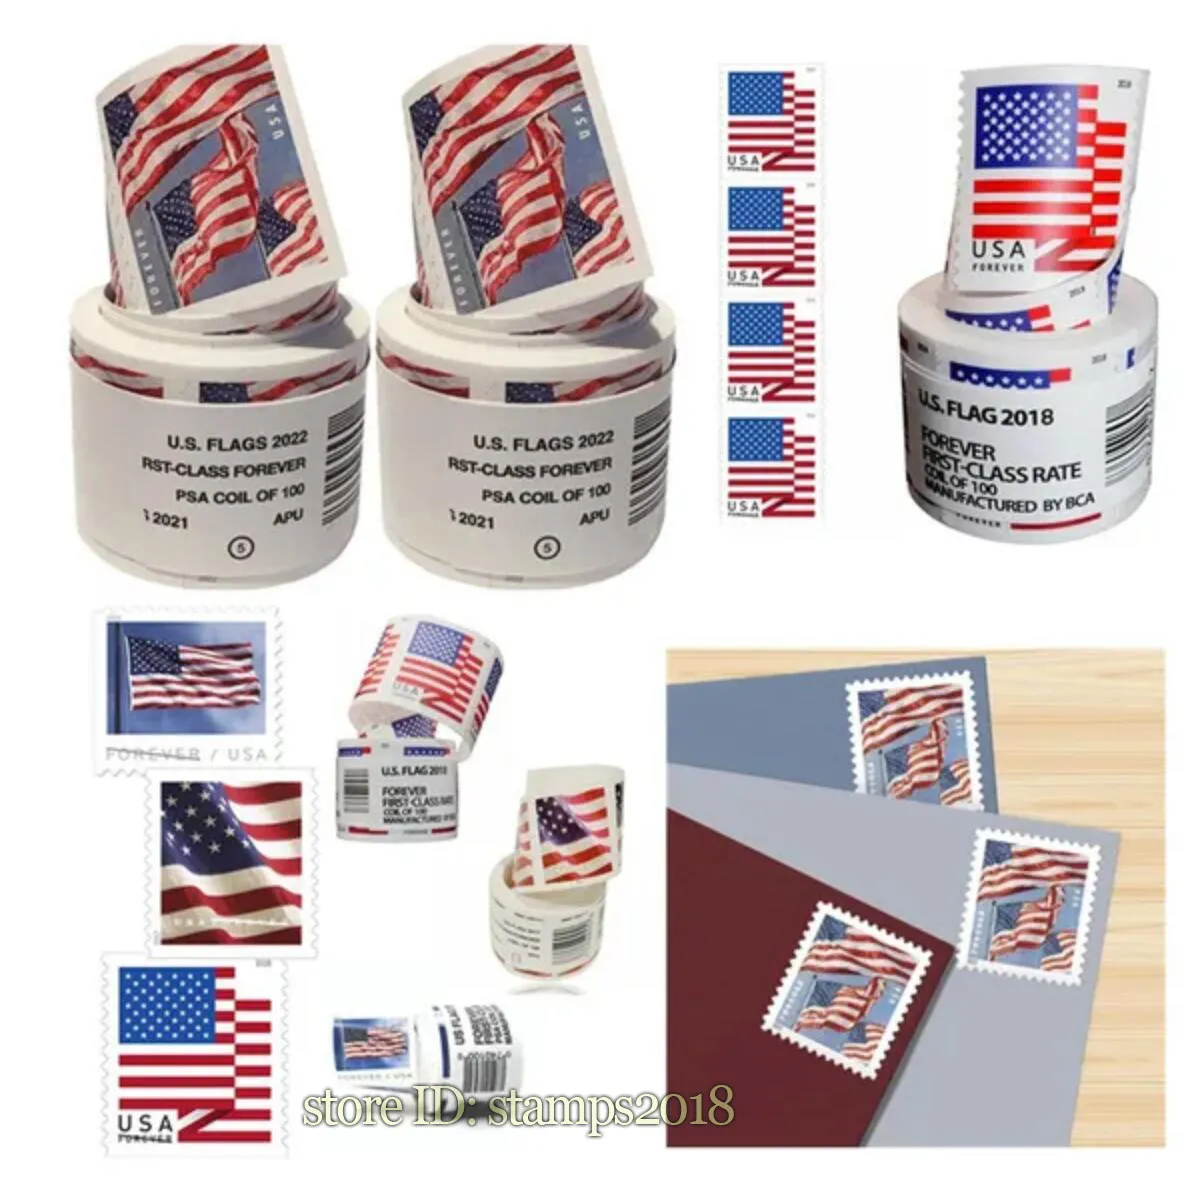 Forever Brand New 2020 U.S. For Envelopes Letters Postcard Office Cards Mail Supplies Collection